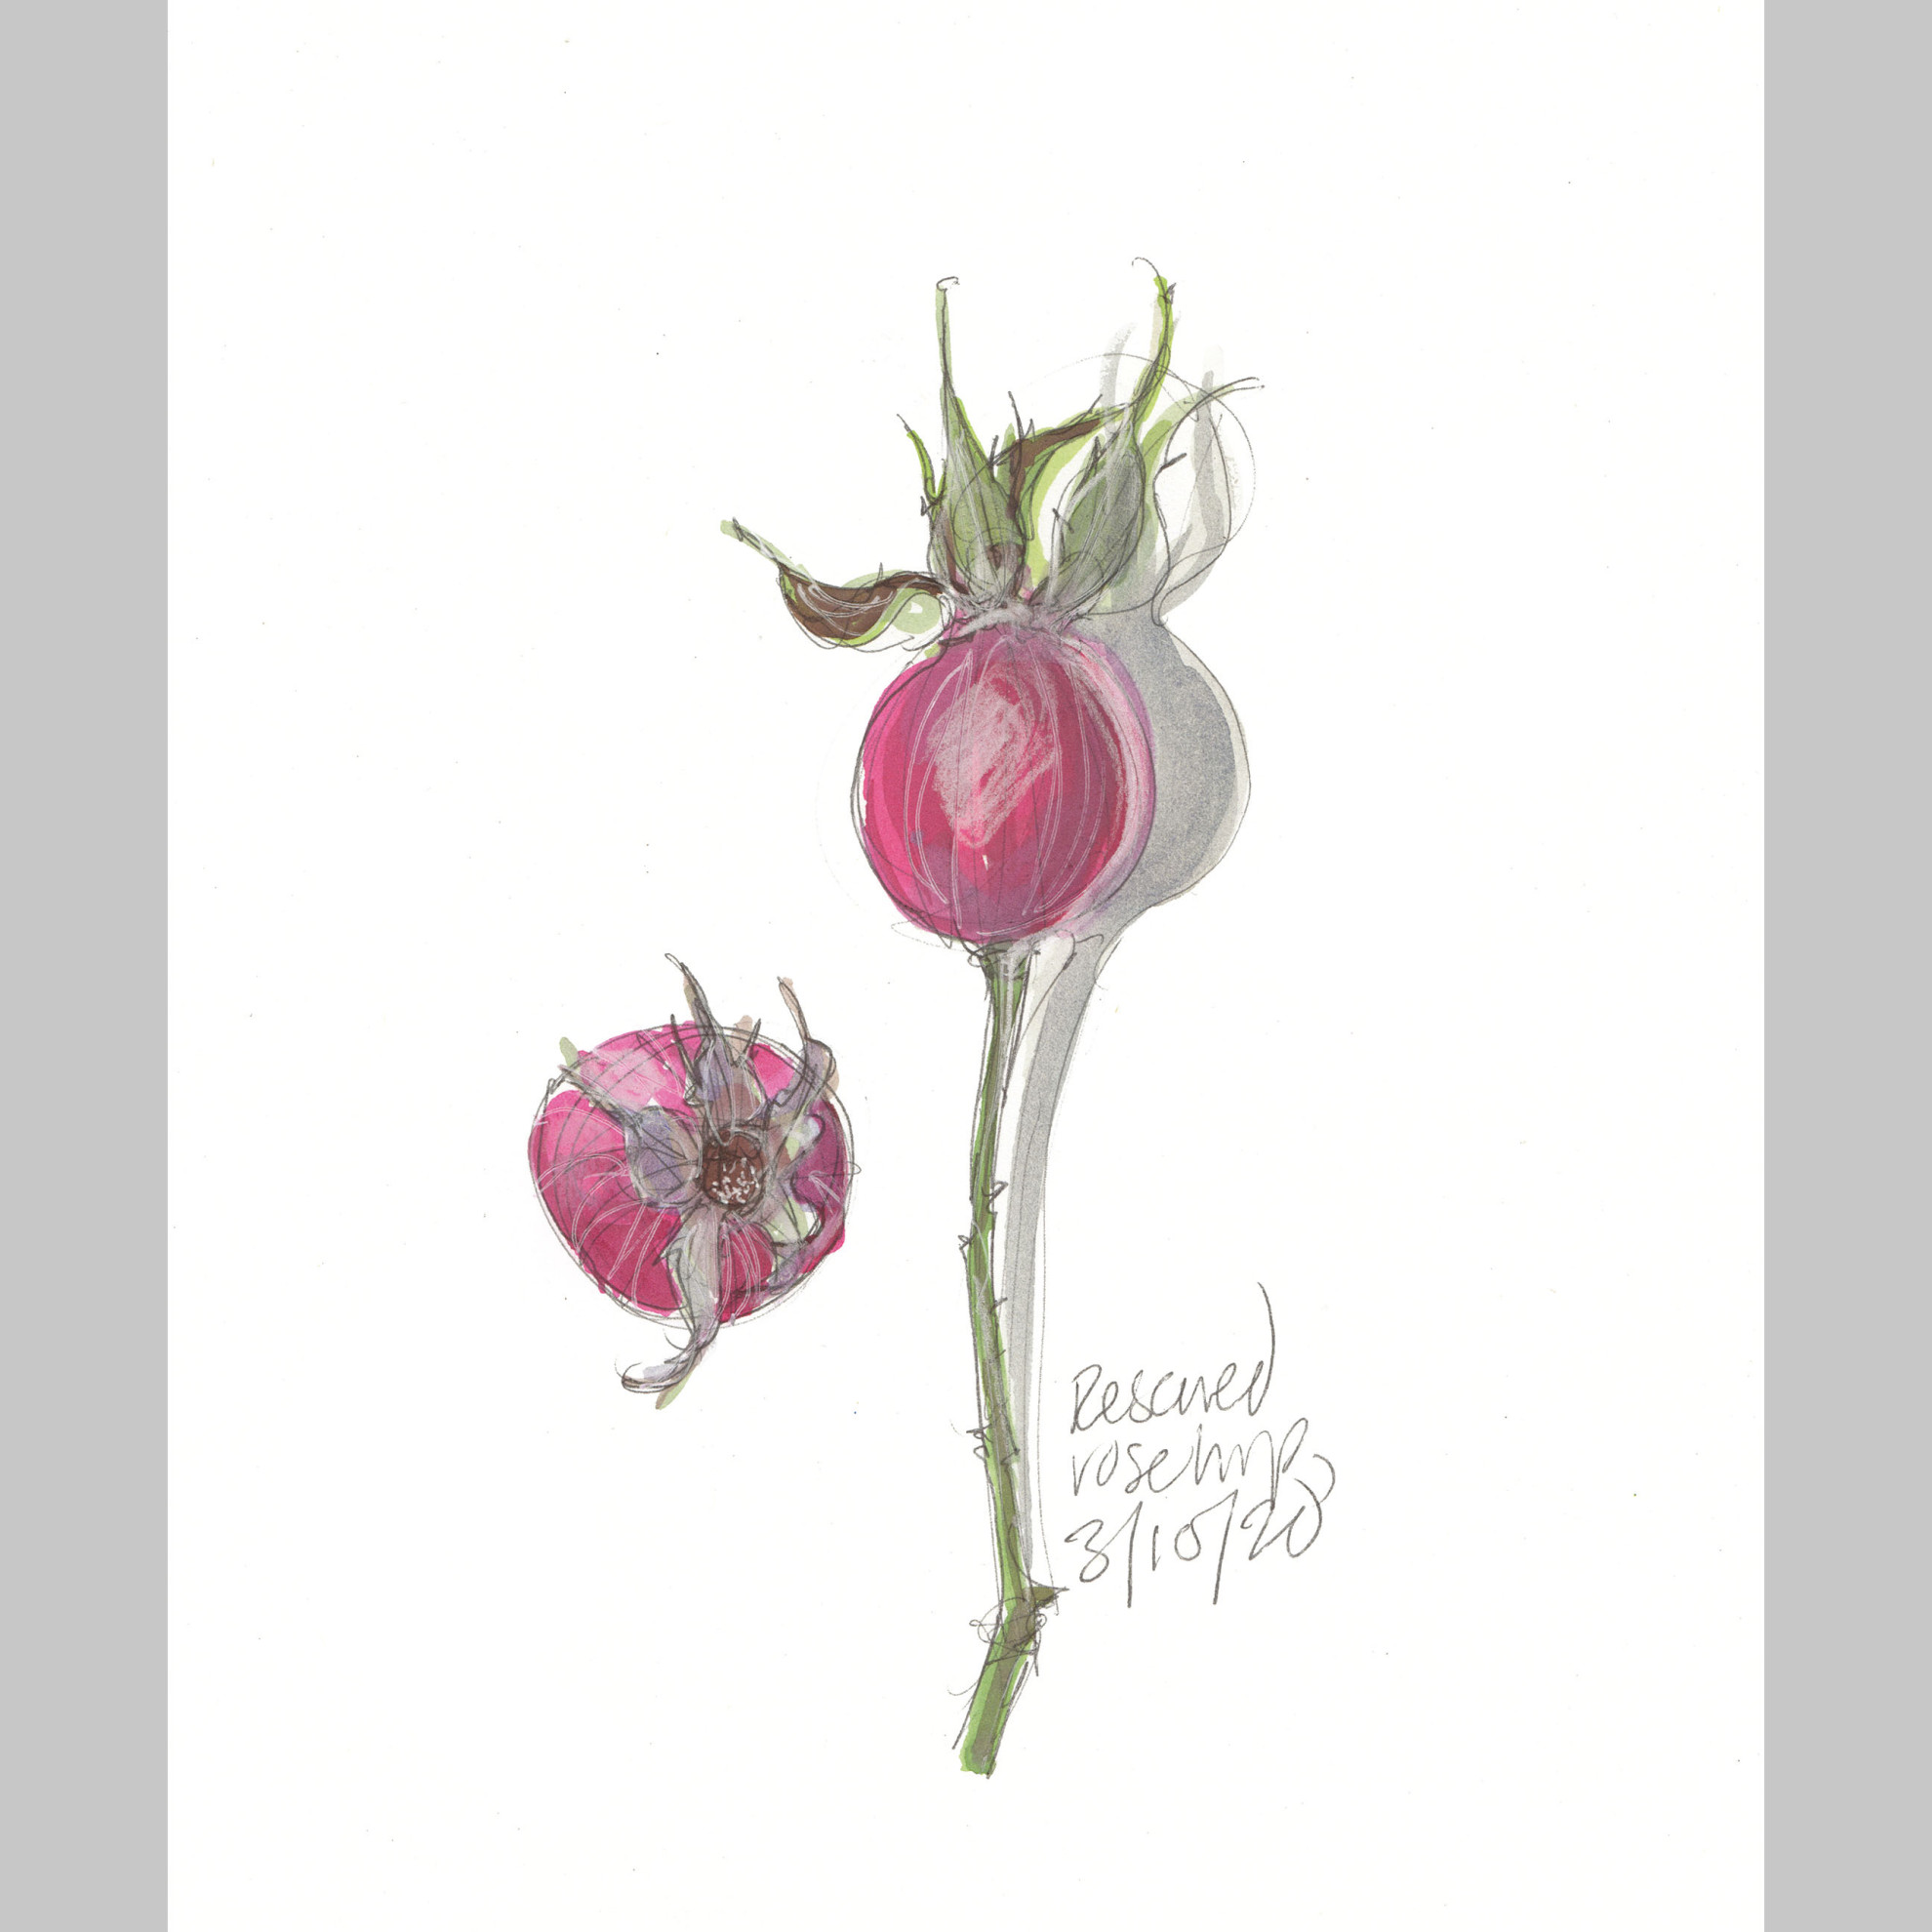 Rescued rosehip 3.10.20 (An original sketch by Lydia Thornley)